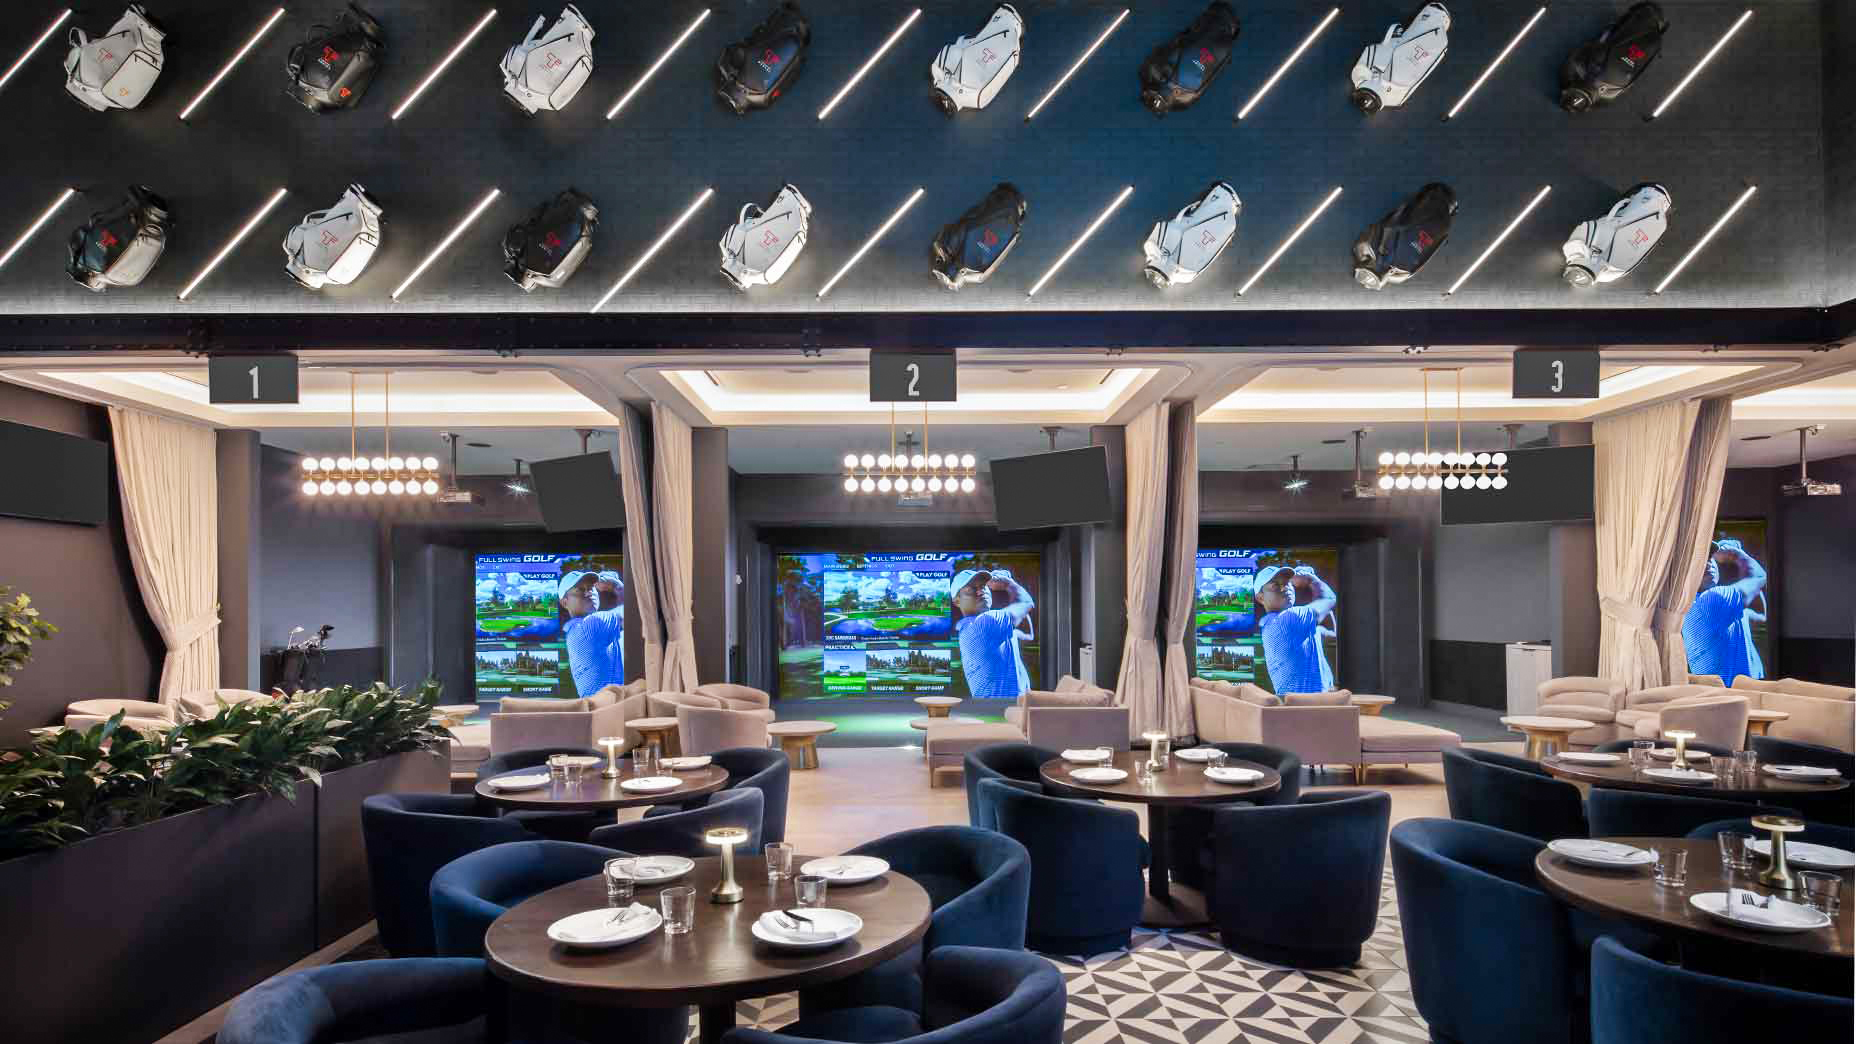 New York's largest sports betting lounge now open 